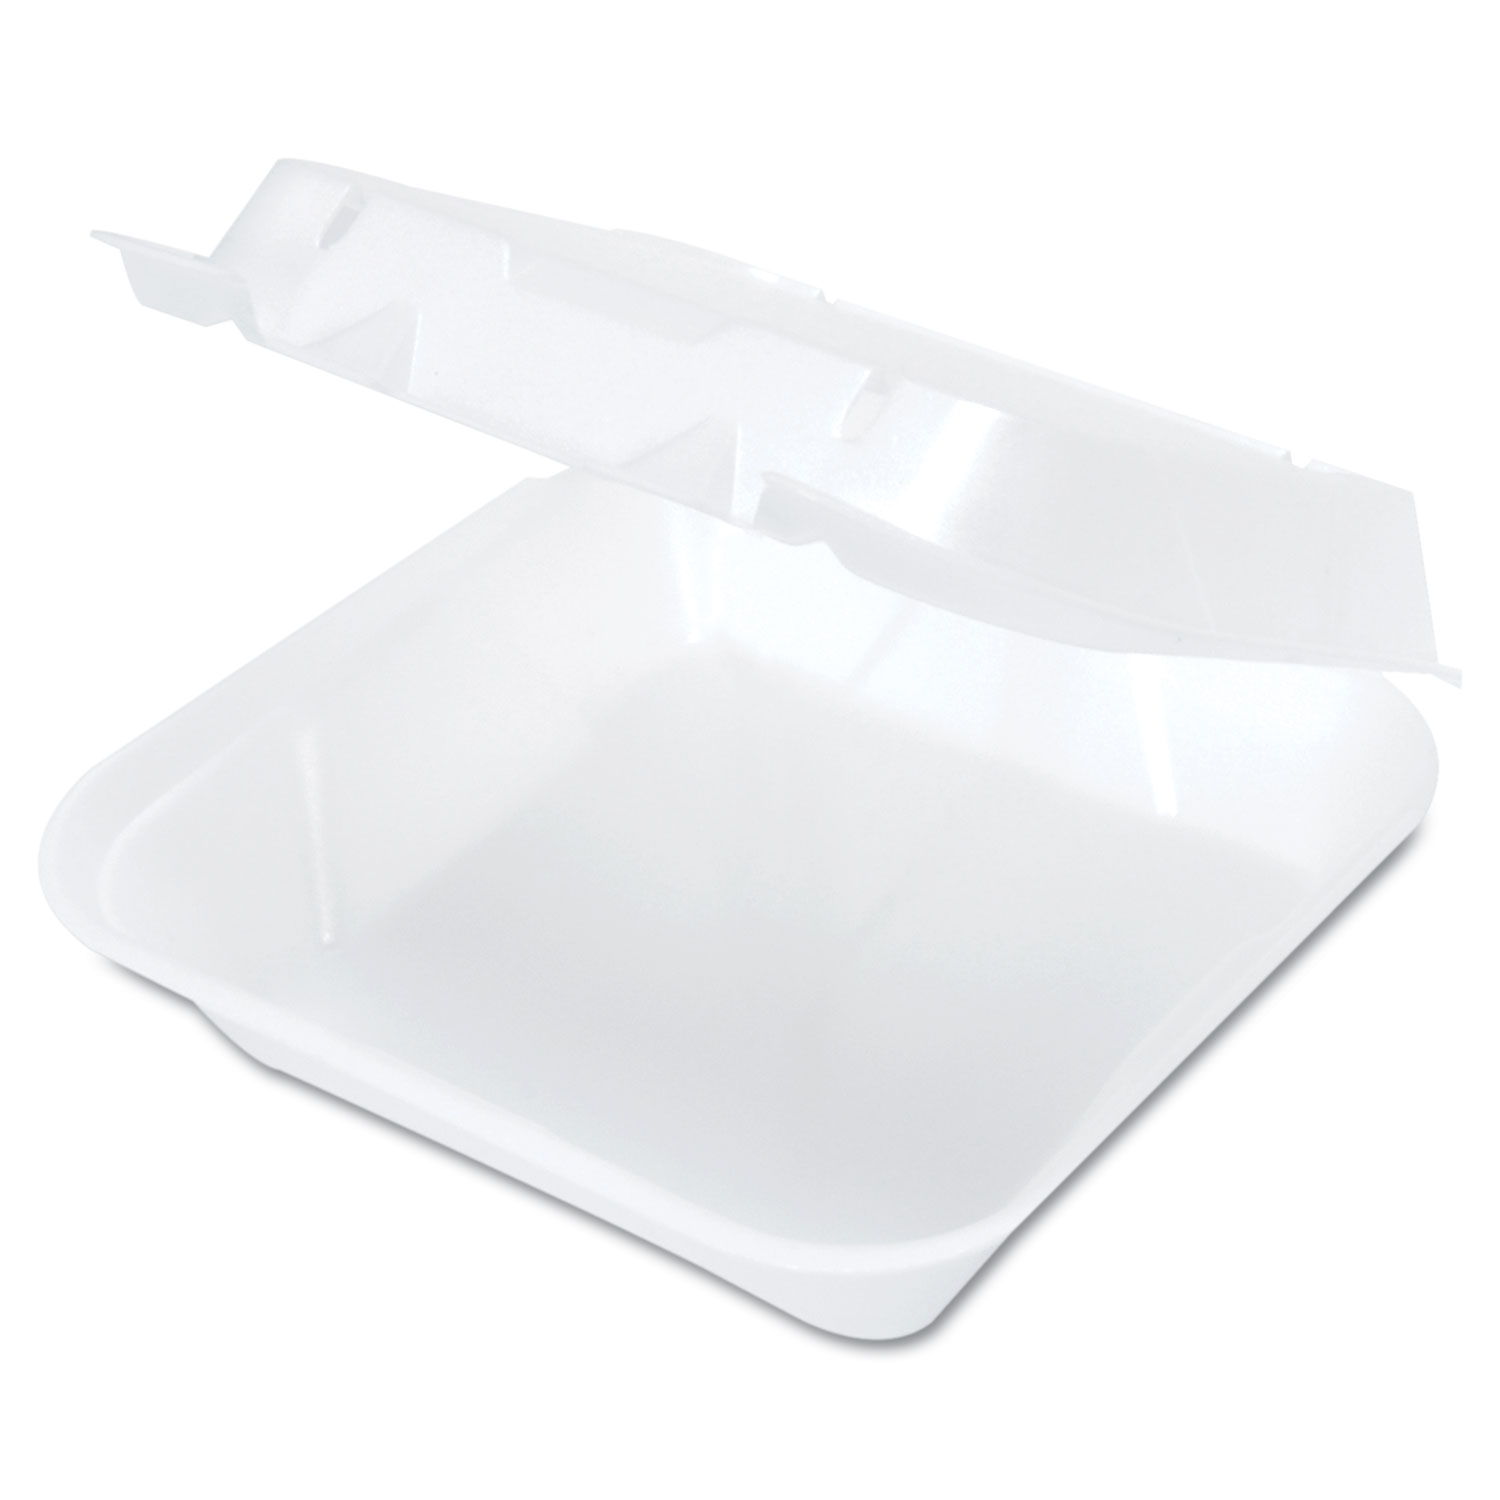  Genpak SN240-V-- Snap-It Vented Foam Hinged Container, White, 8-1/4 x 8 x 3, 100/Bag, 2 Bags/CT (GNPSN240V) 